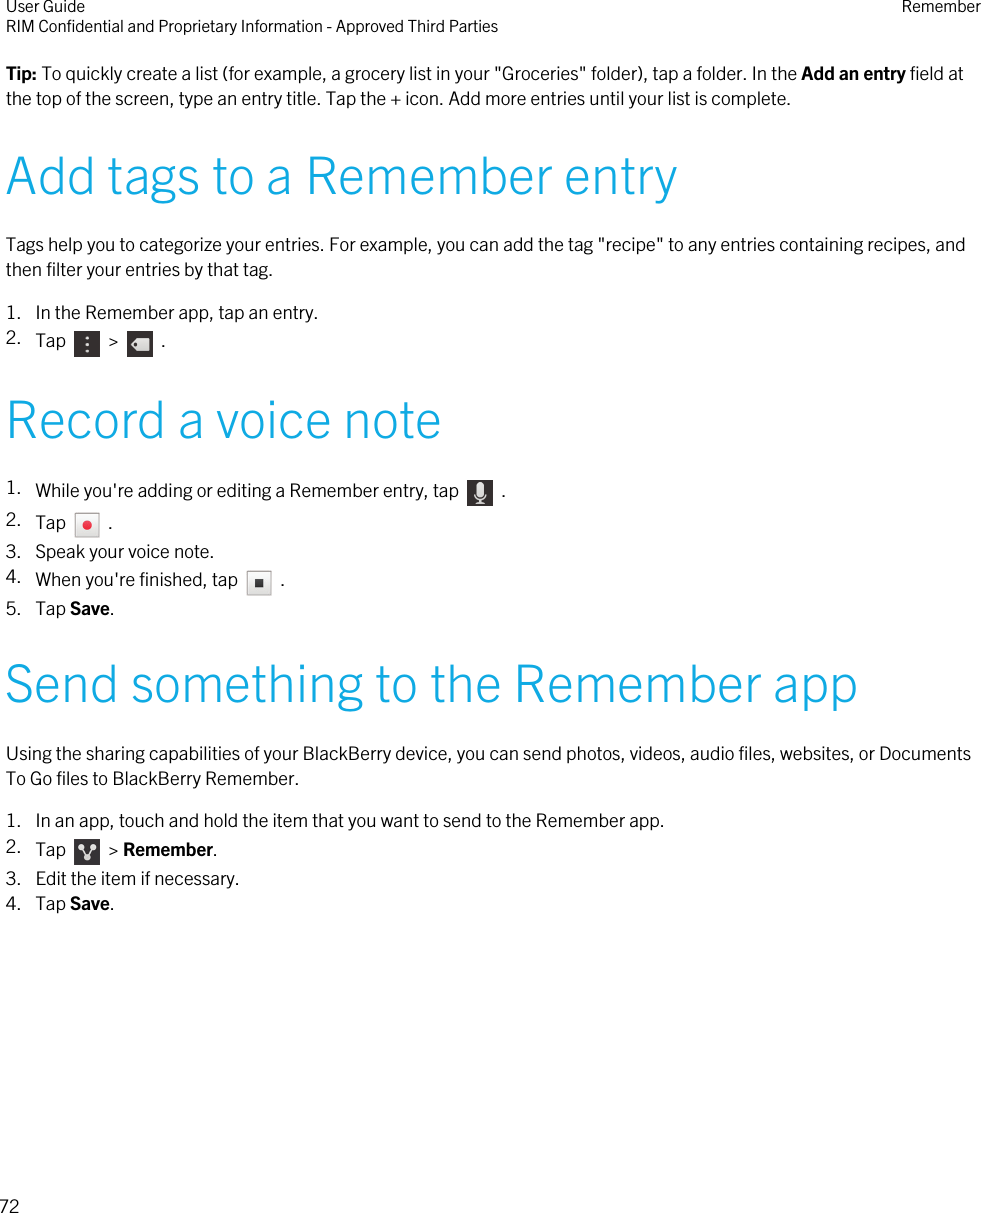 Tip: To quickly create a list (for example, a grocery list in your &quot;Groceries&quot; folder), tap a folder. In the Add an entry field atthe top of the screen, type an entry title. Tap the + icon. Add more entries until your list is complete.Add tags to a Remember entryTags help you to categorize your entries. For example, you can add the tag &quot;recipe&quot; to any entries containing recipes, andthen filter your entries by that tag.1. In the Remember app, tap an entry.2. Tap    &gt;    .Record a voice note1. While you&apos;re adding or editing a Remember entry, tap    .2. Tap    .3. Speak your voice note.4. When you&apos;re finished, tap    .5. Tap Save.Send something to the Remember appUsing the sharing capabilities of your BlackBerry device, you can send photos, videos, audio files, websites, or DocumentsTo Go files to BlackBerry Remember.1. In an app, touch and hold the item that you want to send to the Remember app.2. Tap    &gt; Remember.3. Edit the item if necessary.4. Tap Save.User GuideRIM Confidential and Proprietary Information - Approved Third Parties Remember72